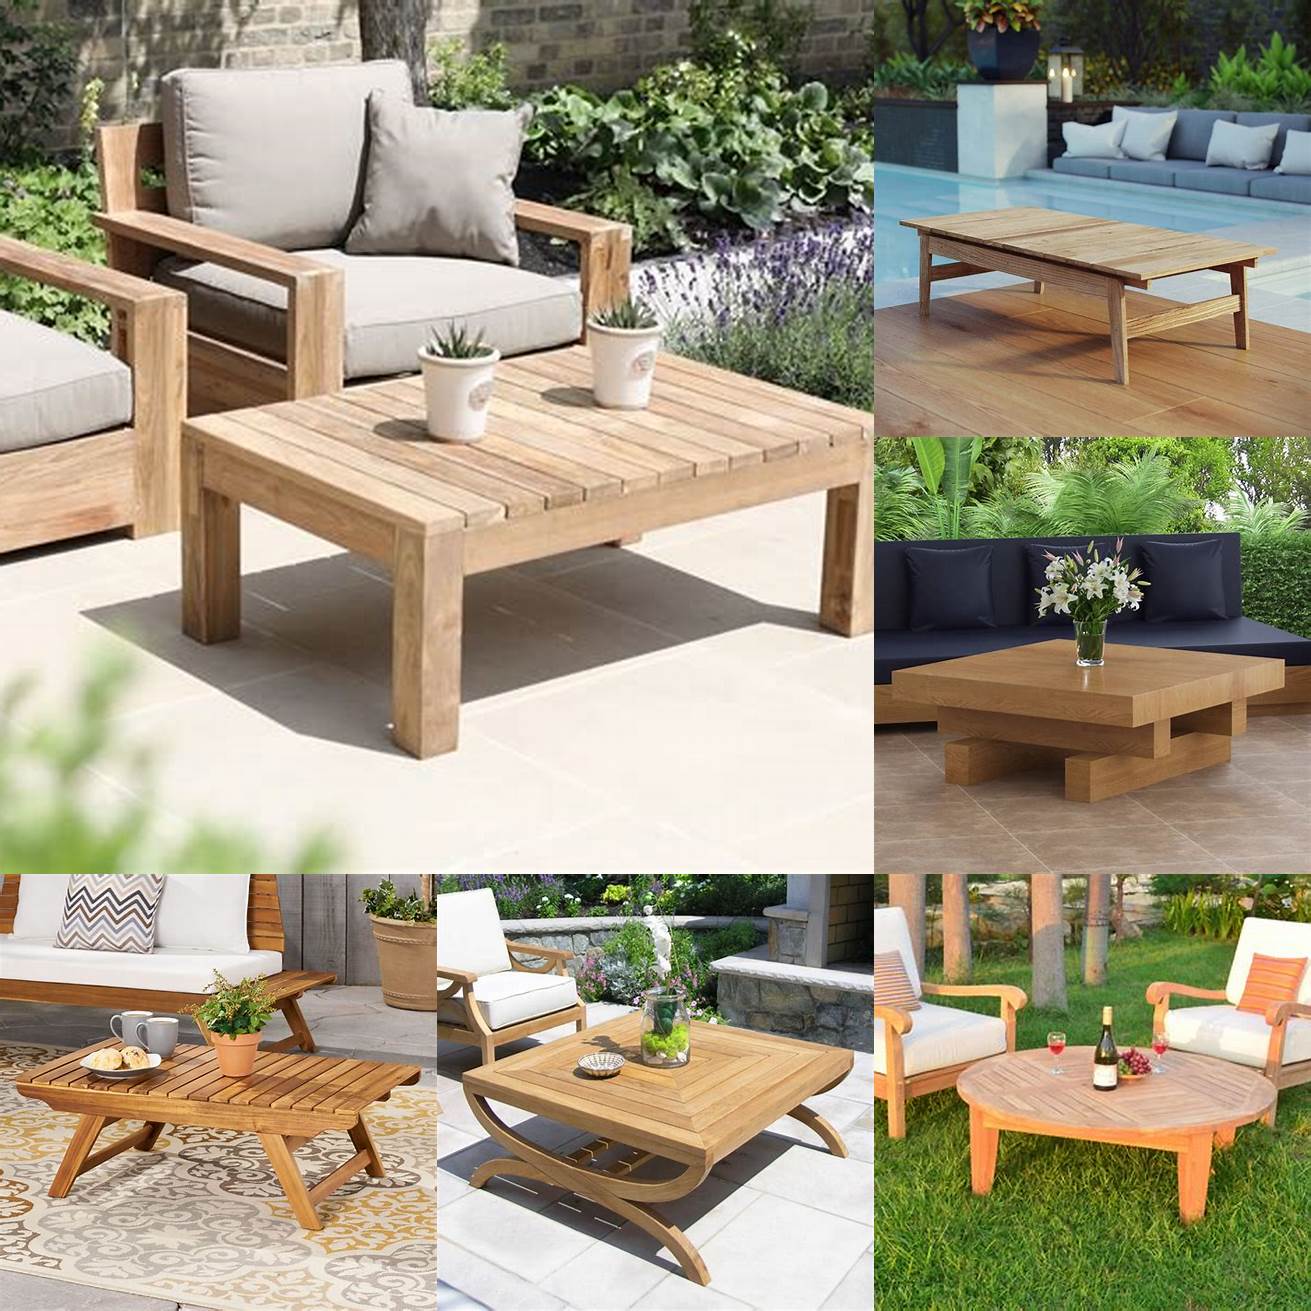 The Teak Outdoor Coffee Table